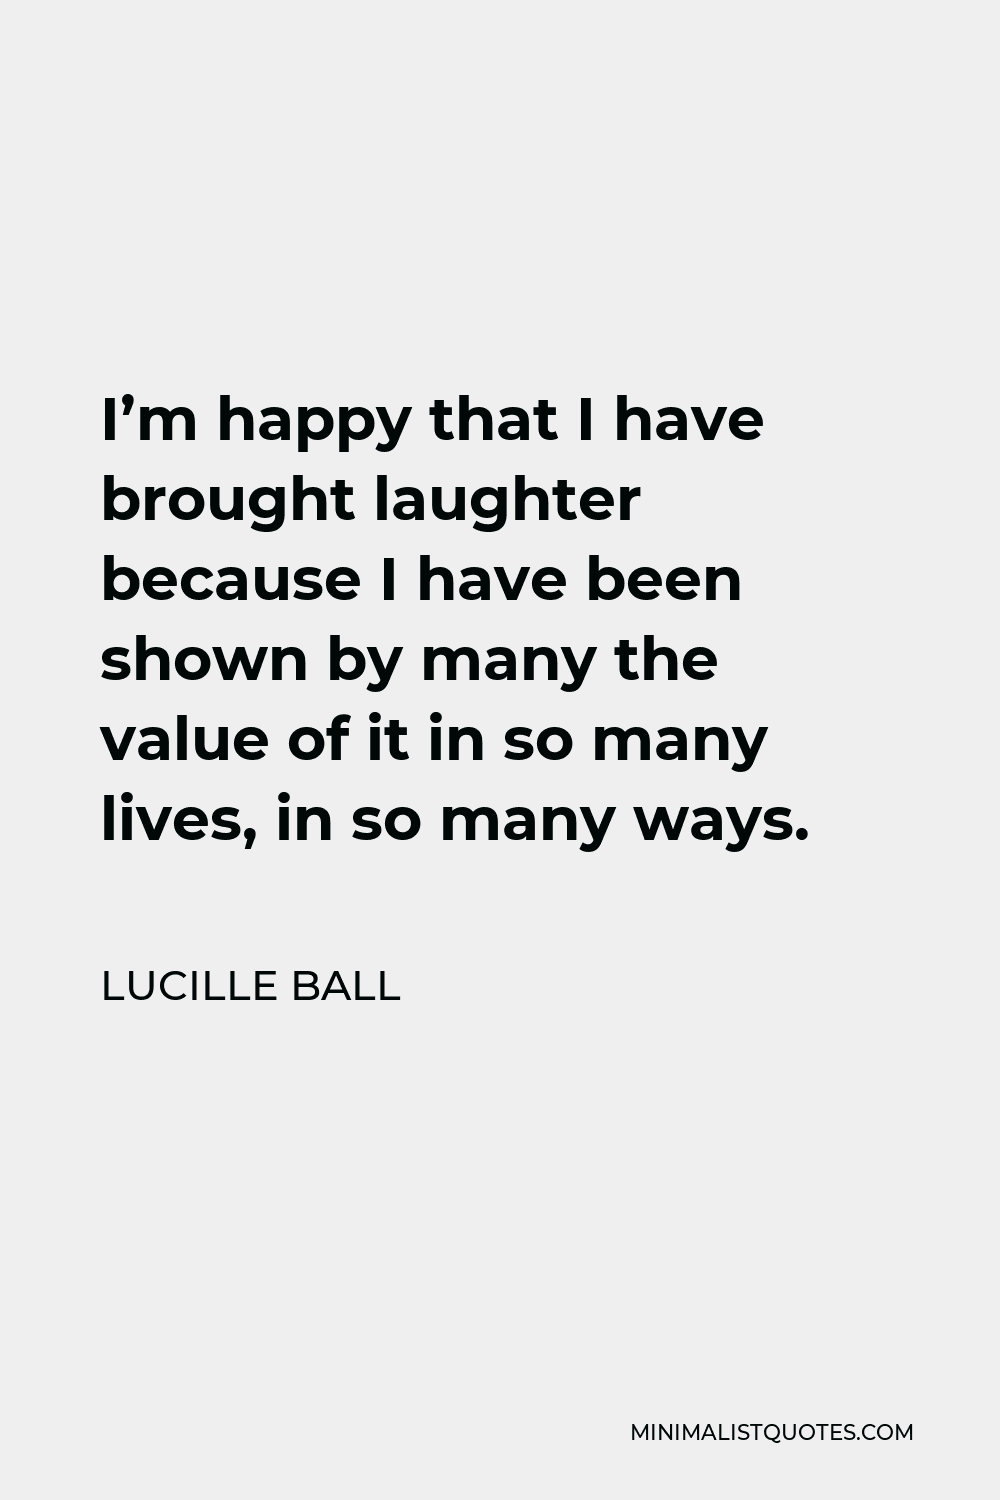 Lucille Ball Quote - I’m happy that I have brought laughter because I have been shown by many the value of it in so many lives, in so many ways.